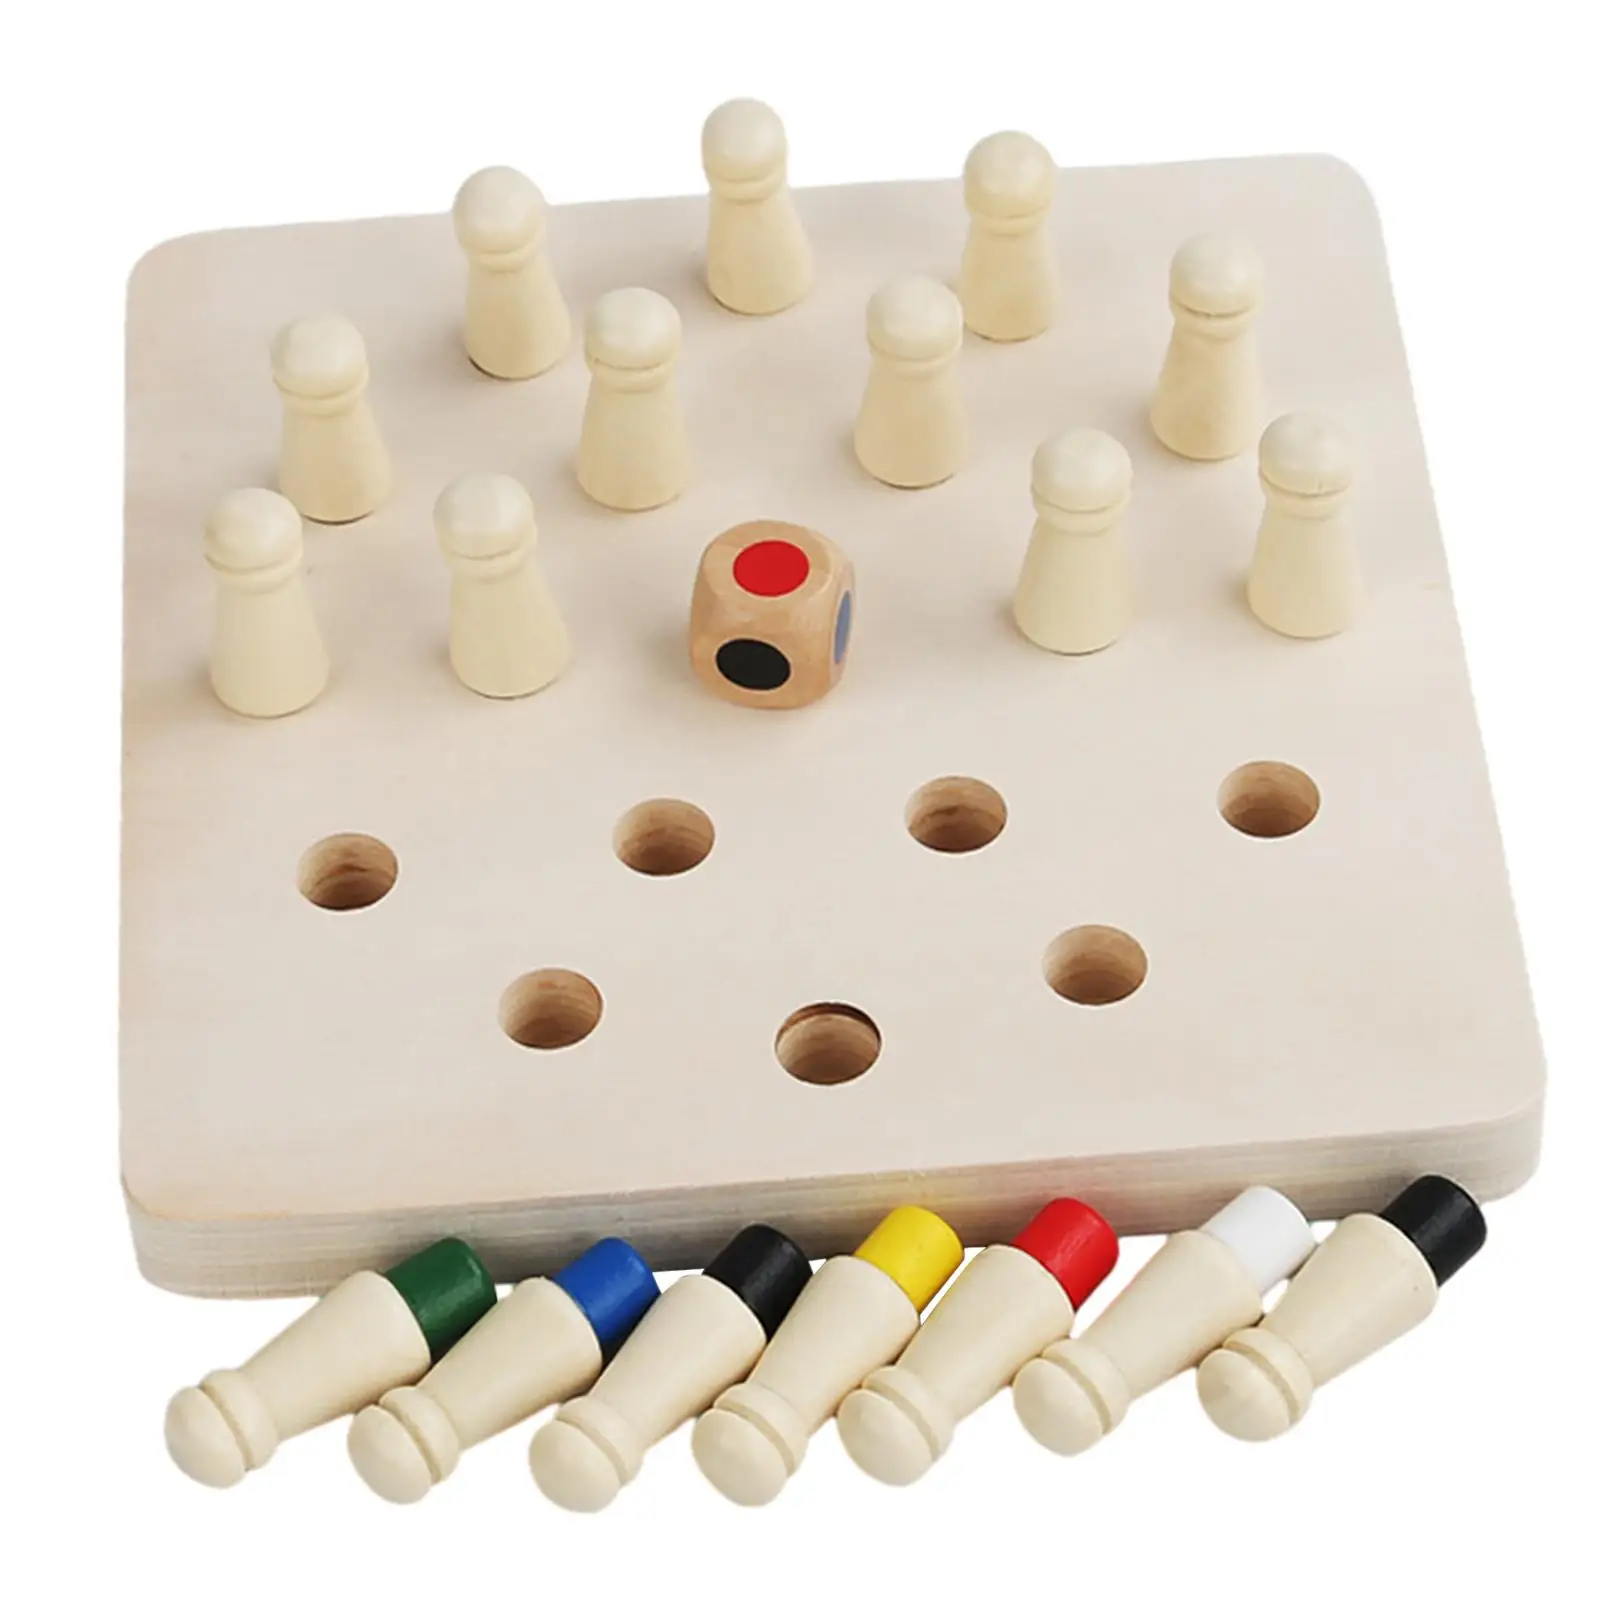 Learning Activities Educational Toys Educational Board Game Memory Chess Toys for Kids Adults Toddlers Boys Children